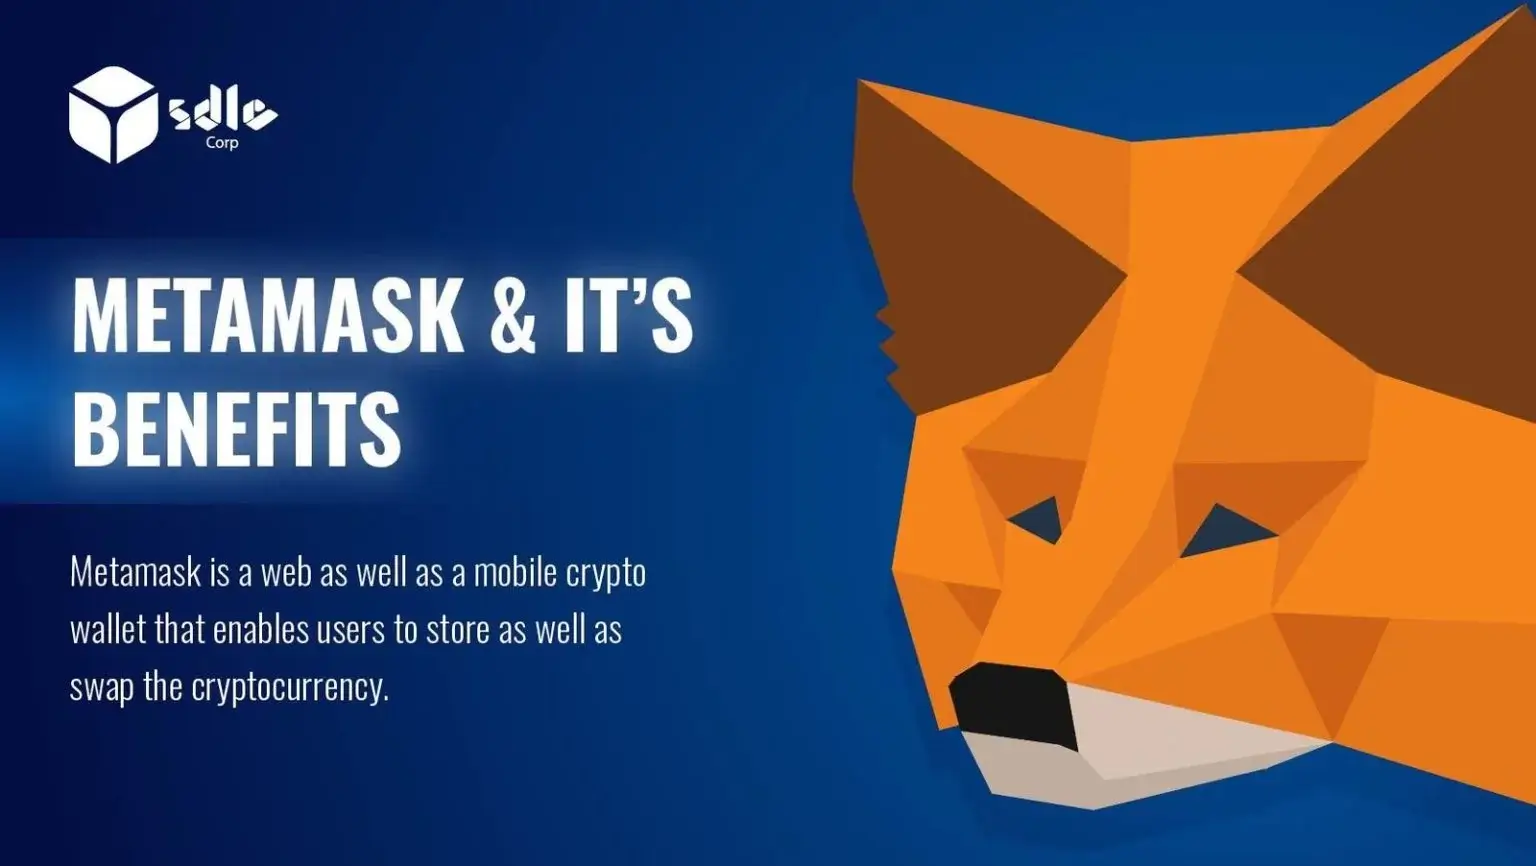 The Impact of Metamask on the Crypto Landscape